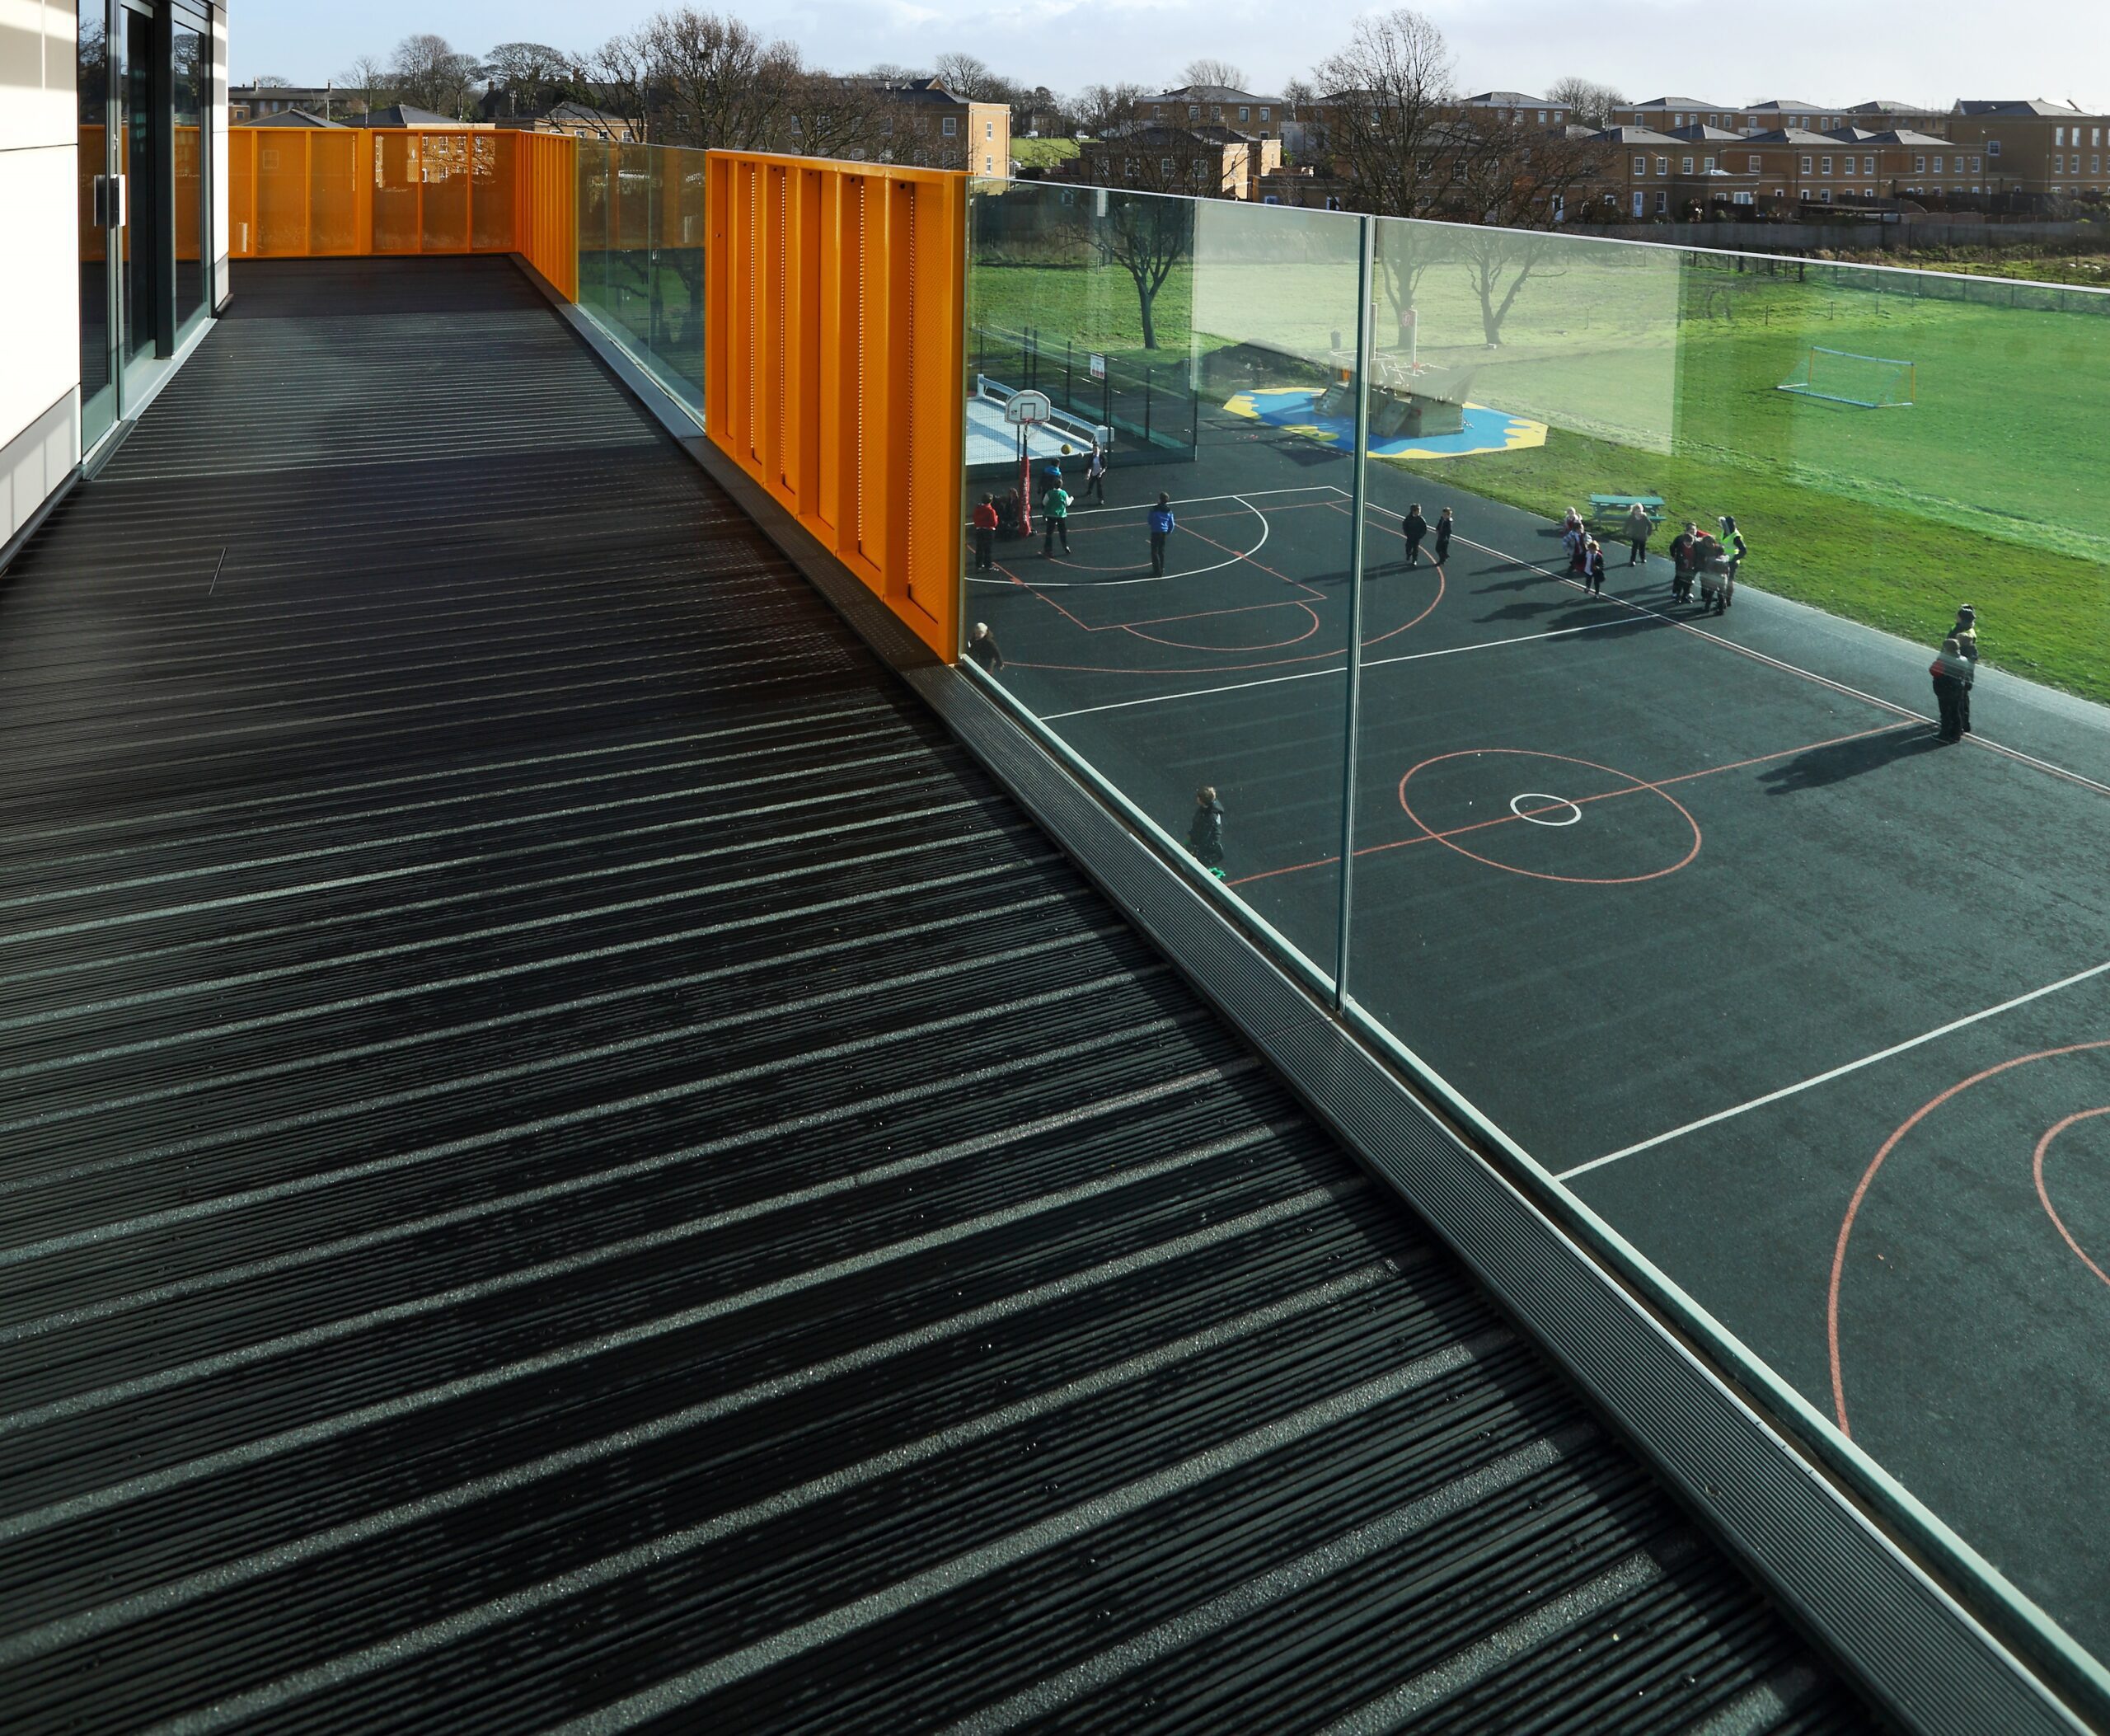 Composite decking installed at a school